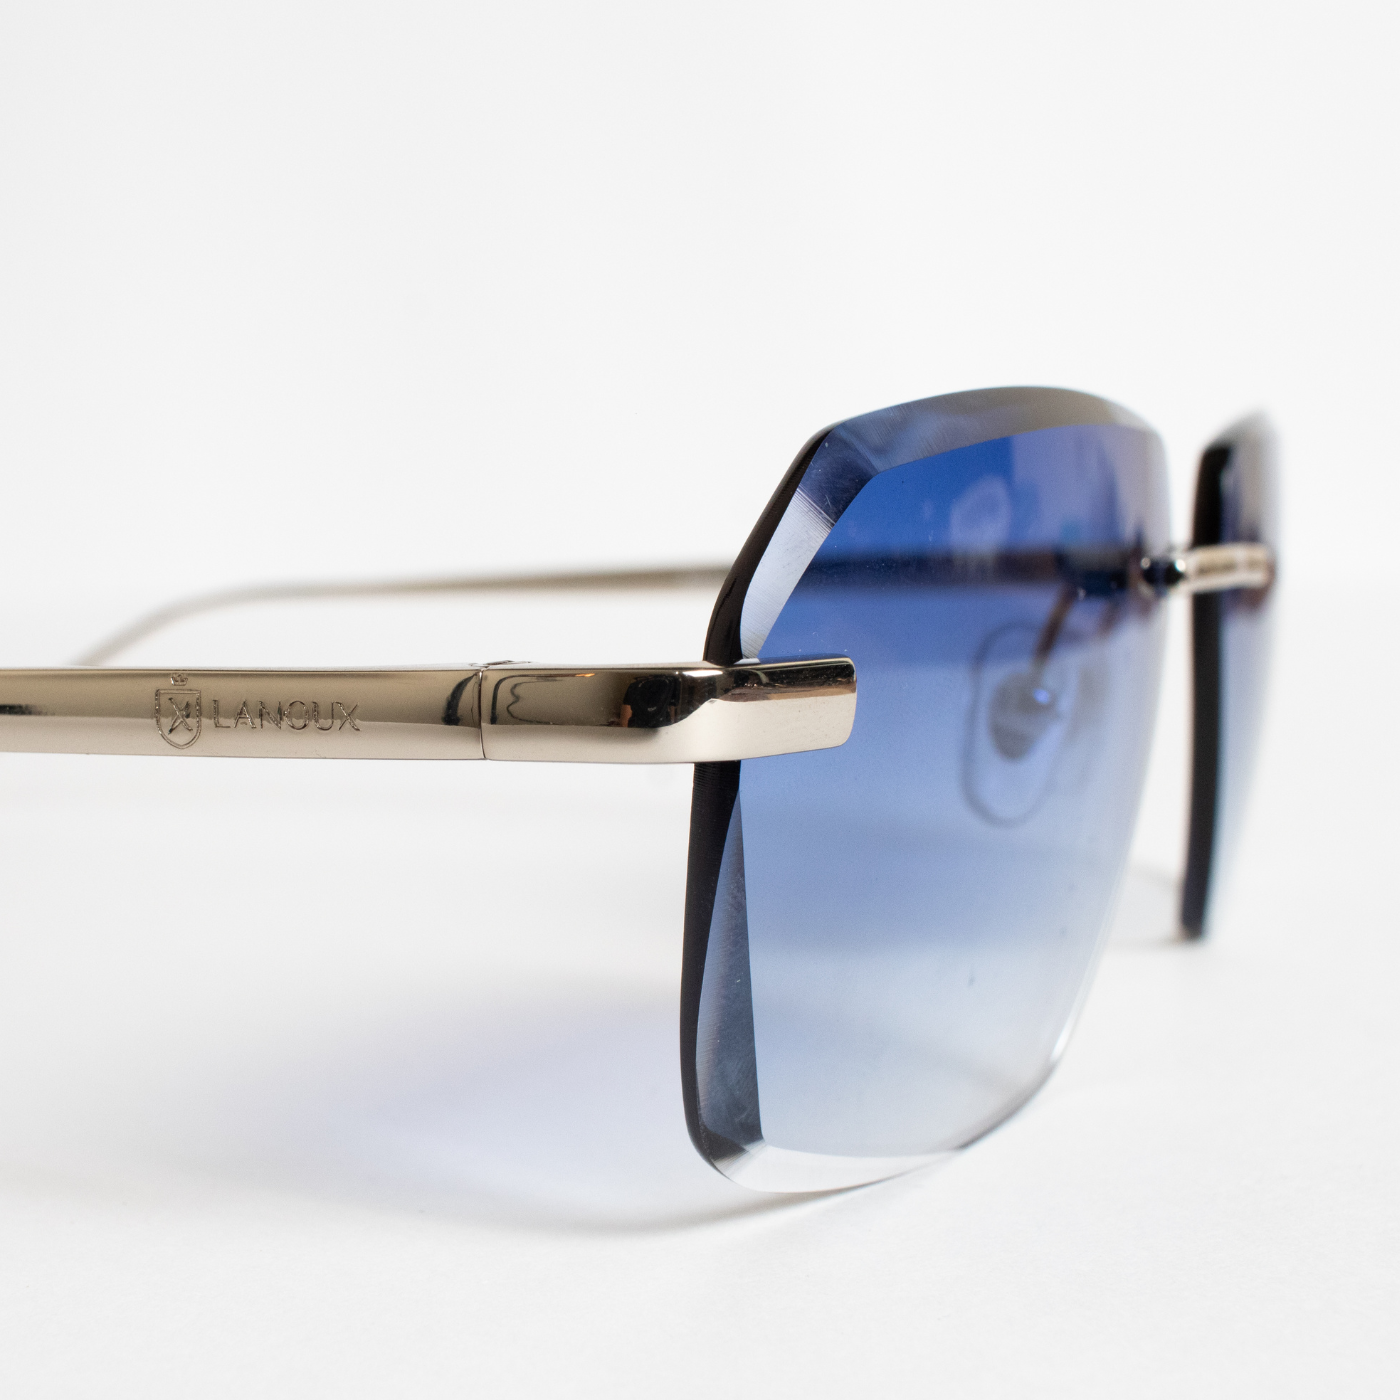 The 'Sancy' model sunglasses, capturing the elegance of rimless onyx blue gradient lenses set in 18k gold frames with a diamond cut. This side view highlights the fine detailing and craftsmanship, with the brand's emblem subtly engraved on the gold temple against a crisp white background.